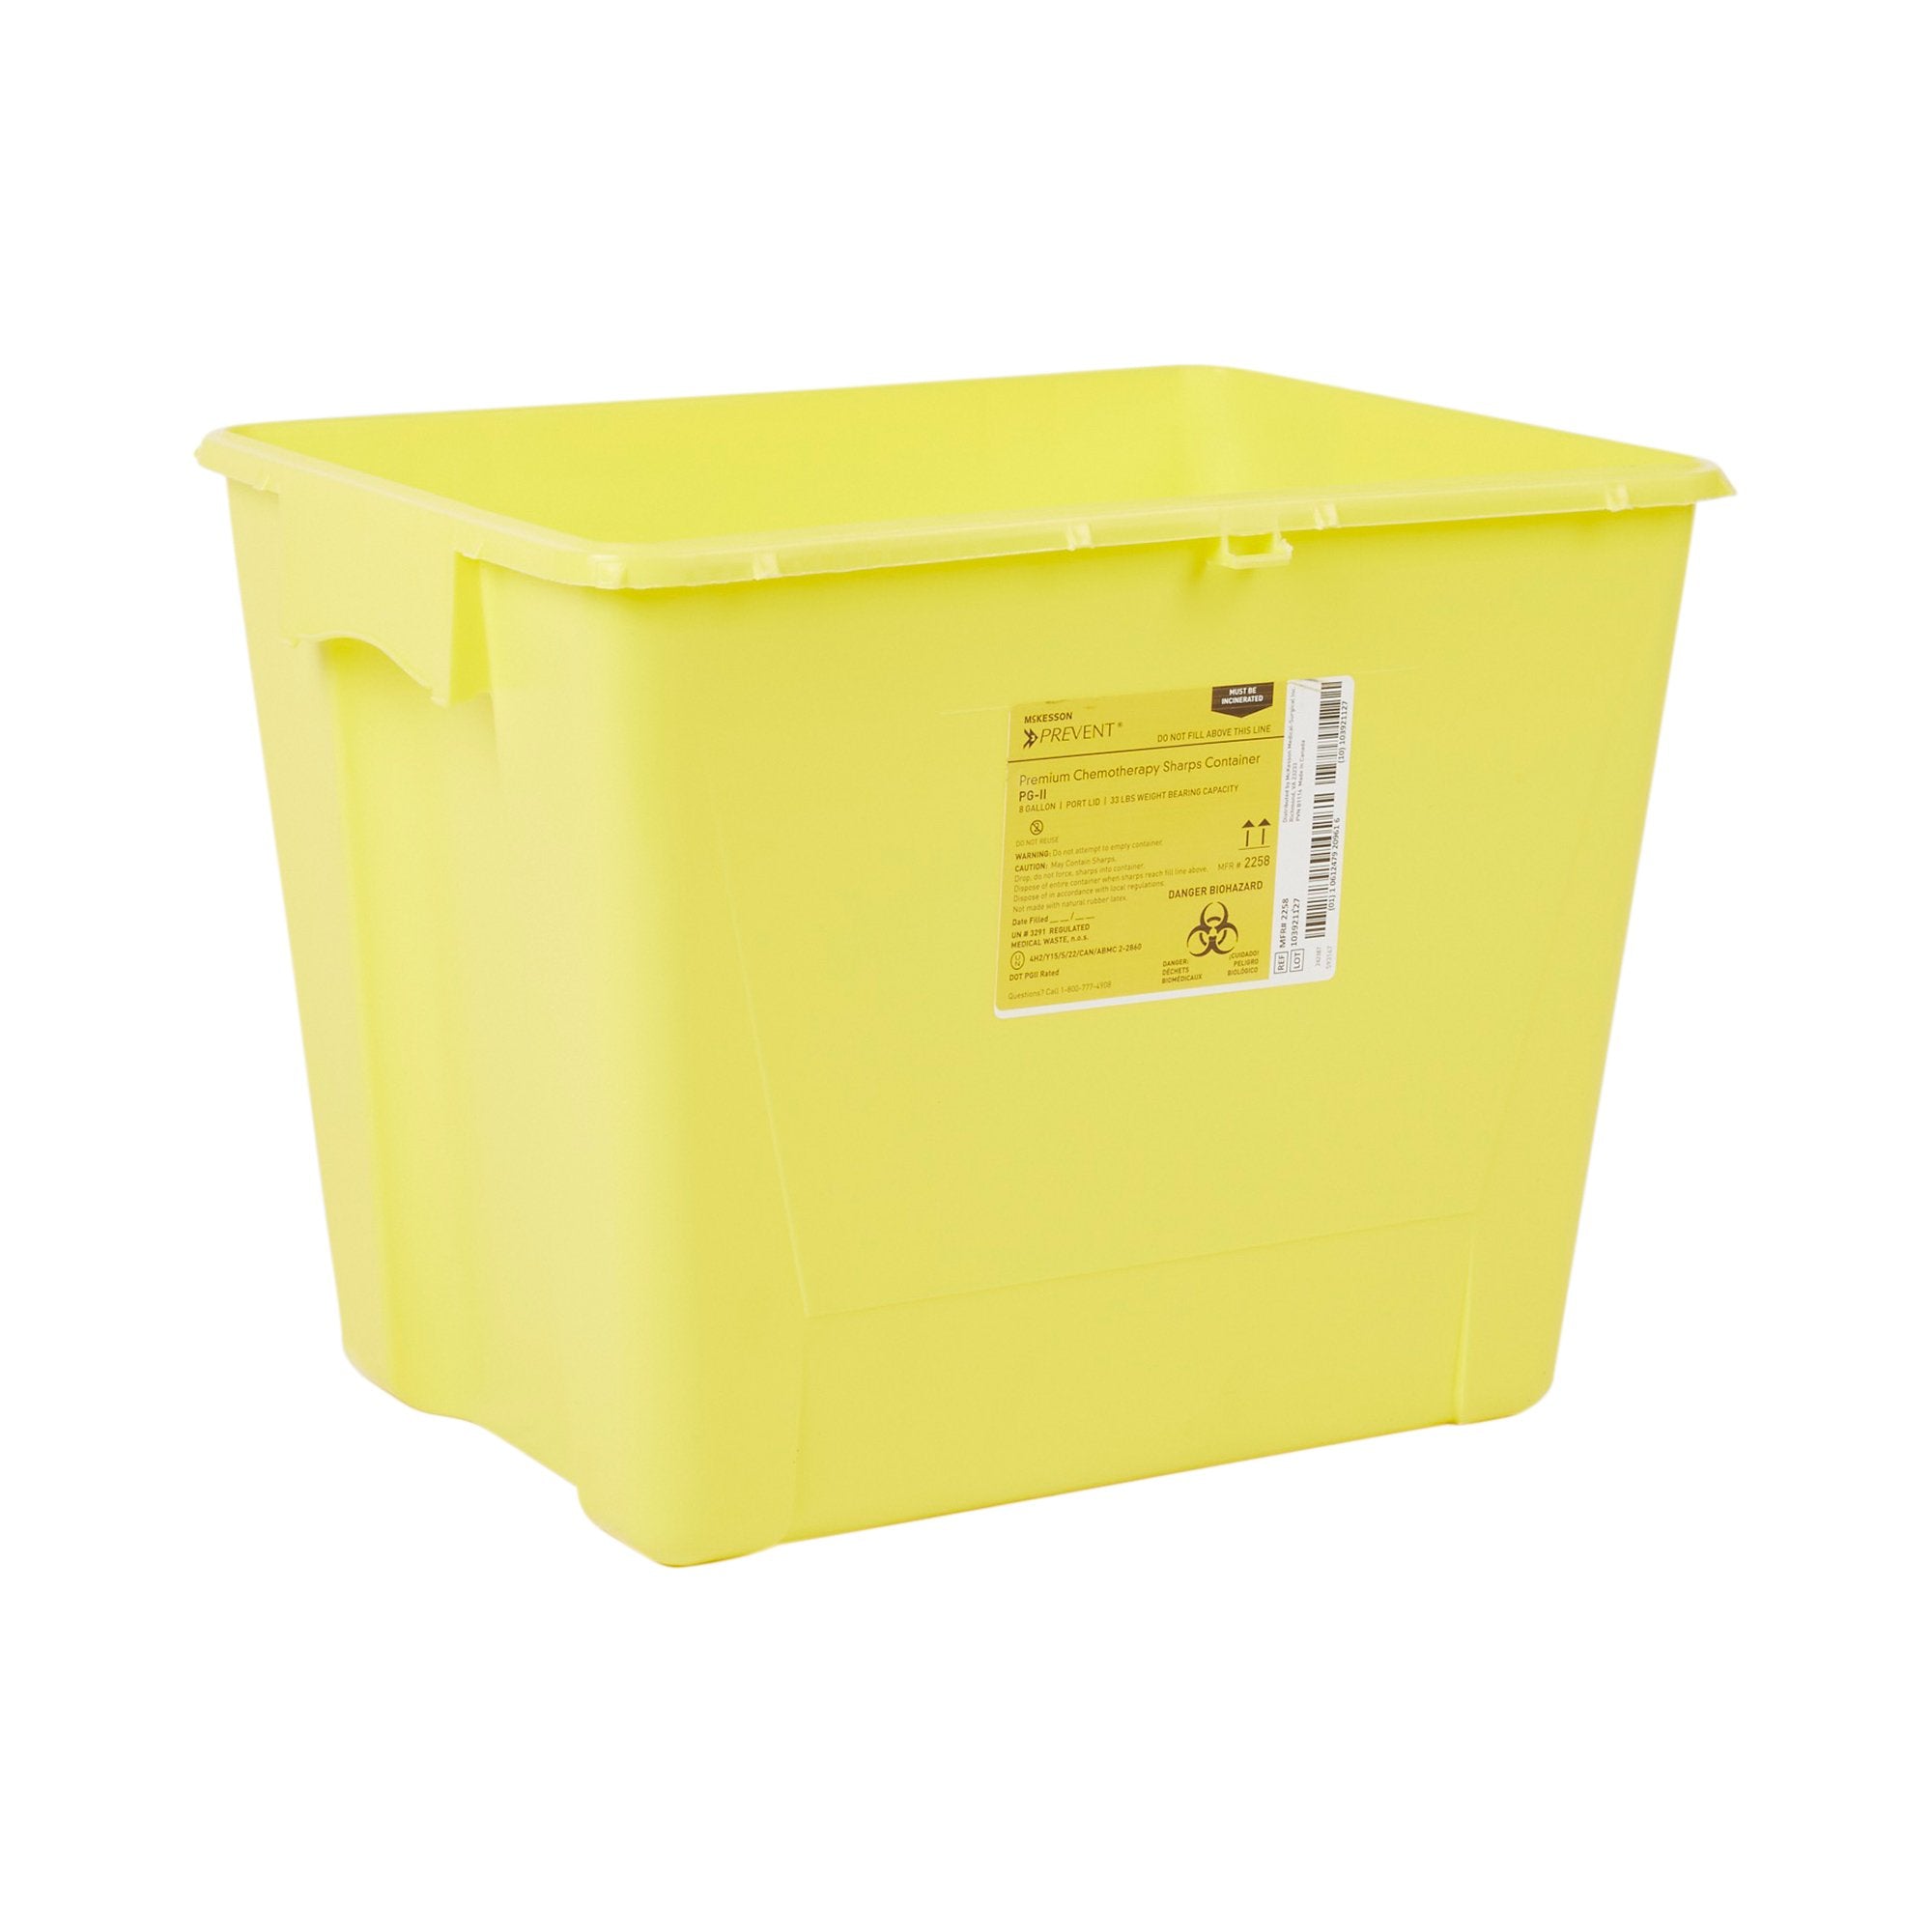 Chemotherapy Waste Container McKesson Prevent® Yellow Base 13-1/2 H X 17-3/10 W X 13 L Inch Vertical Entry 8 Gallon